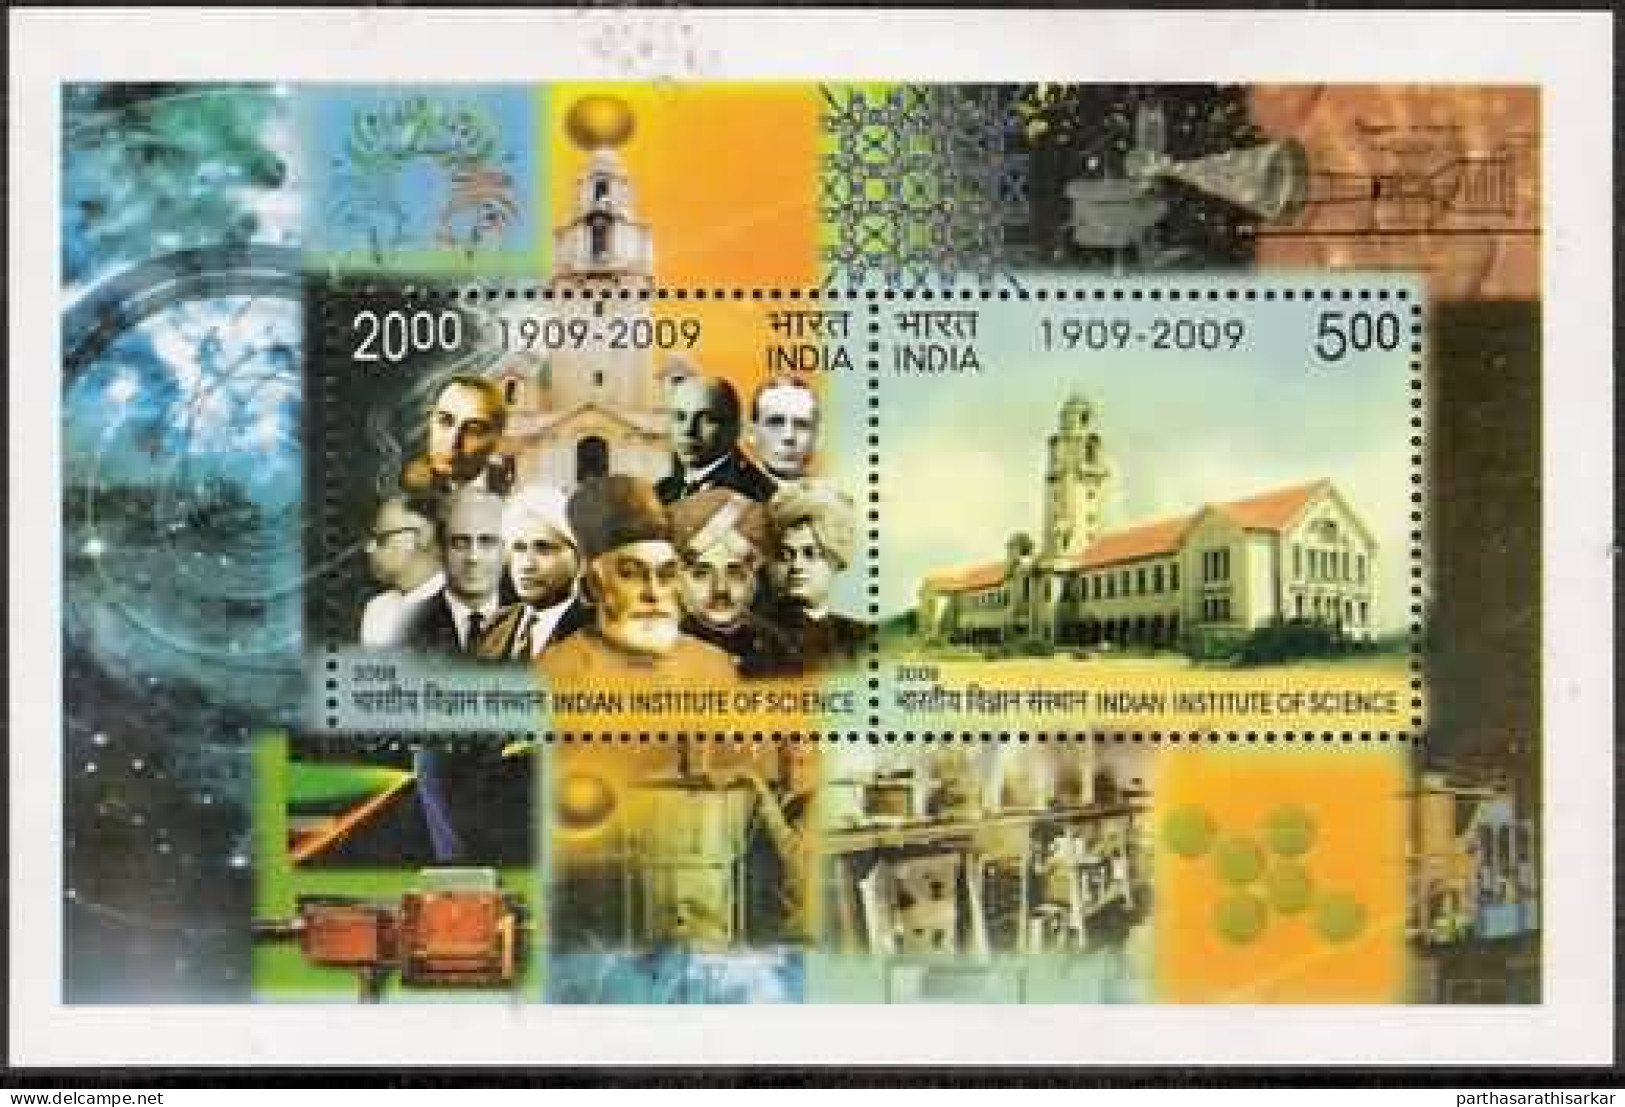 INDIA 2008 INDIAN INSTITUTE OF SCIENCE MINIATURE SHEET MS MNH - Unused Stamps